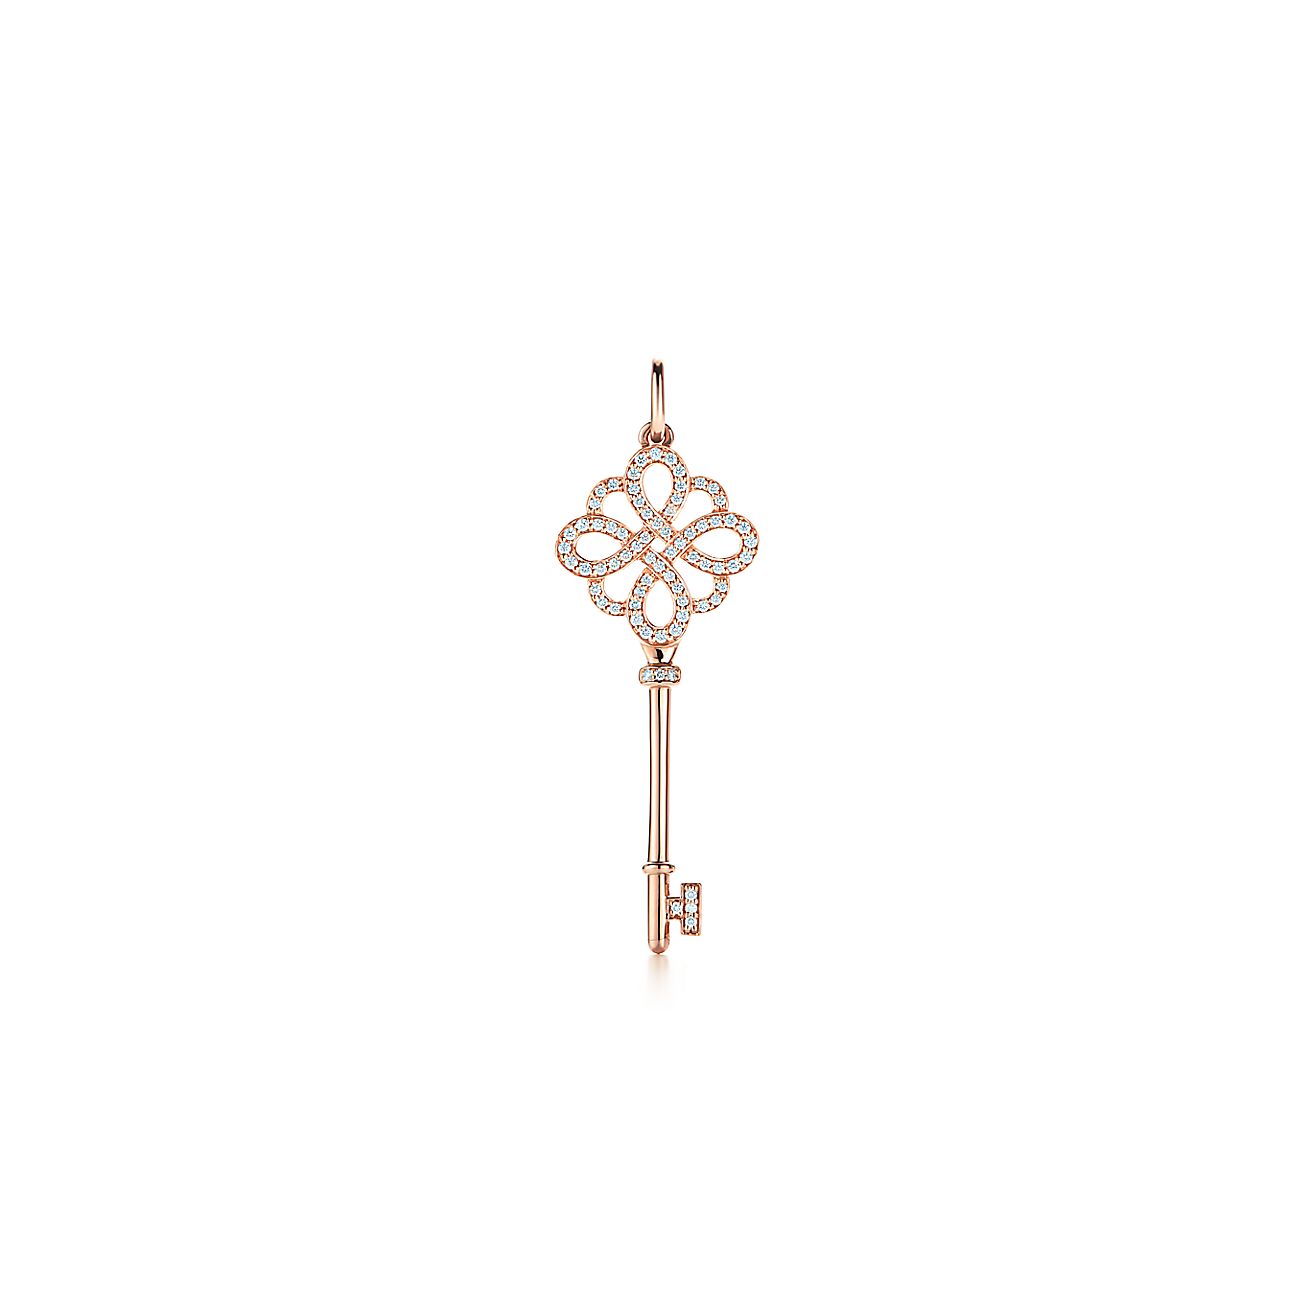 Tiffany Victoria Key in 18K Rose Gold with Diamonds